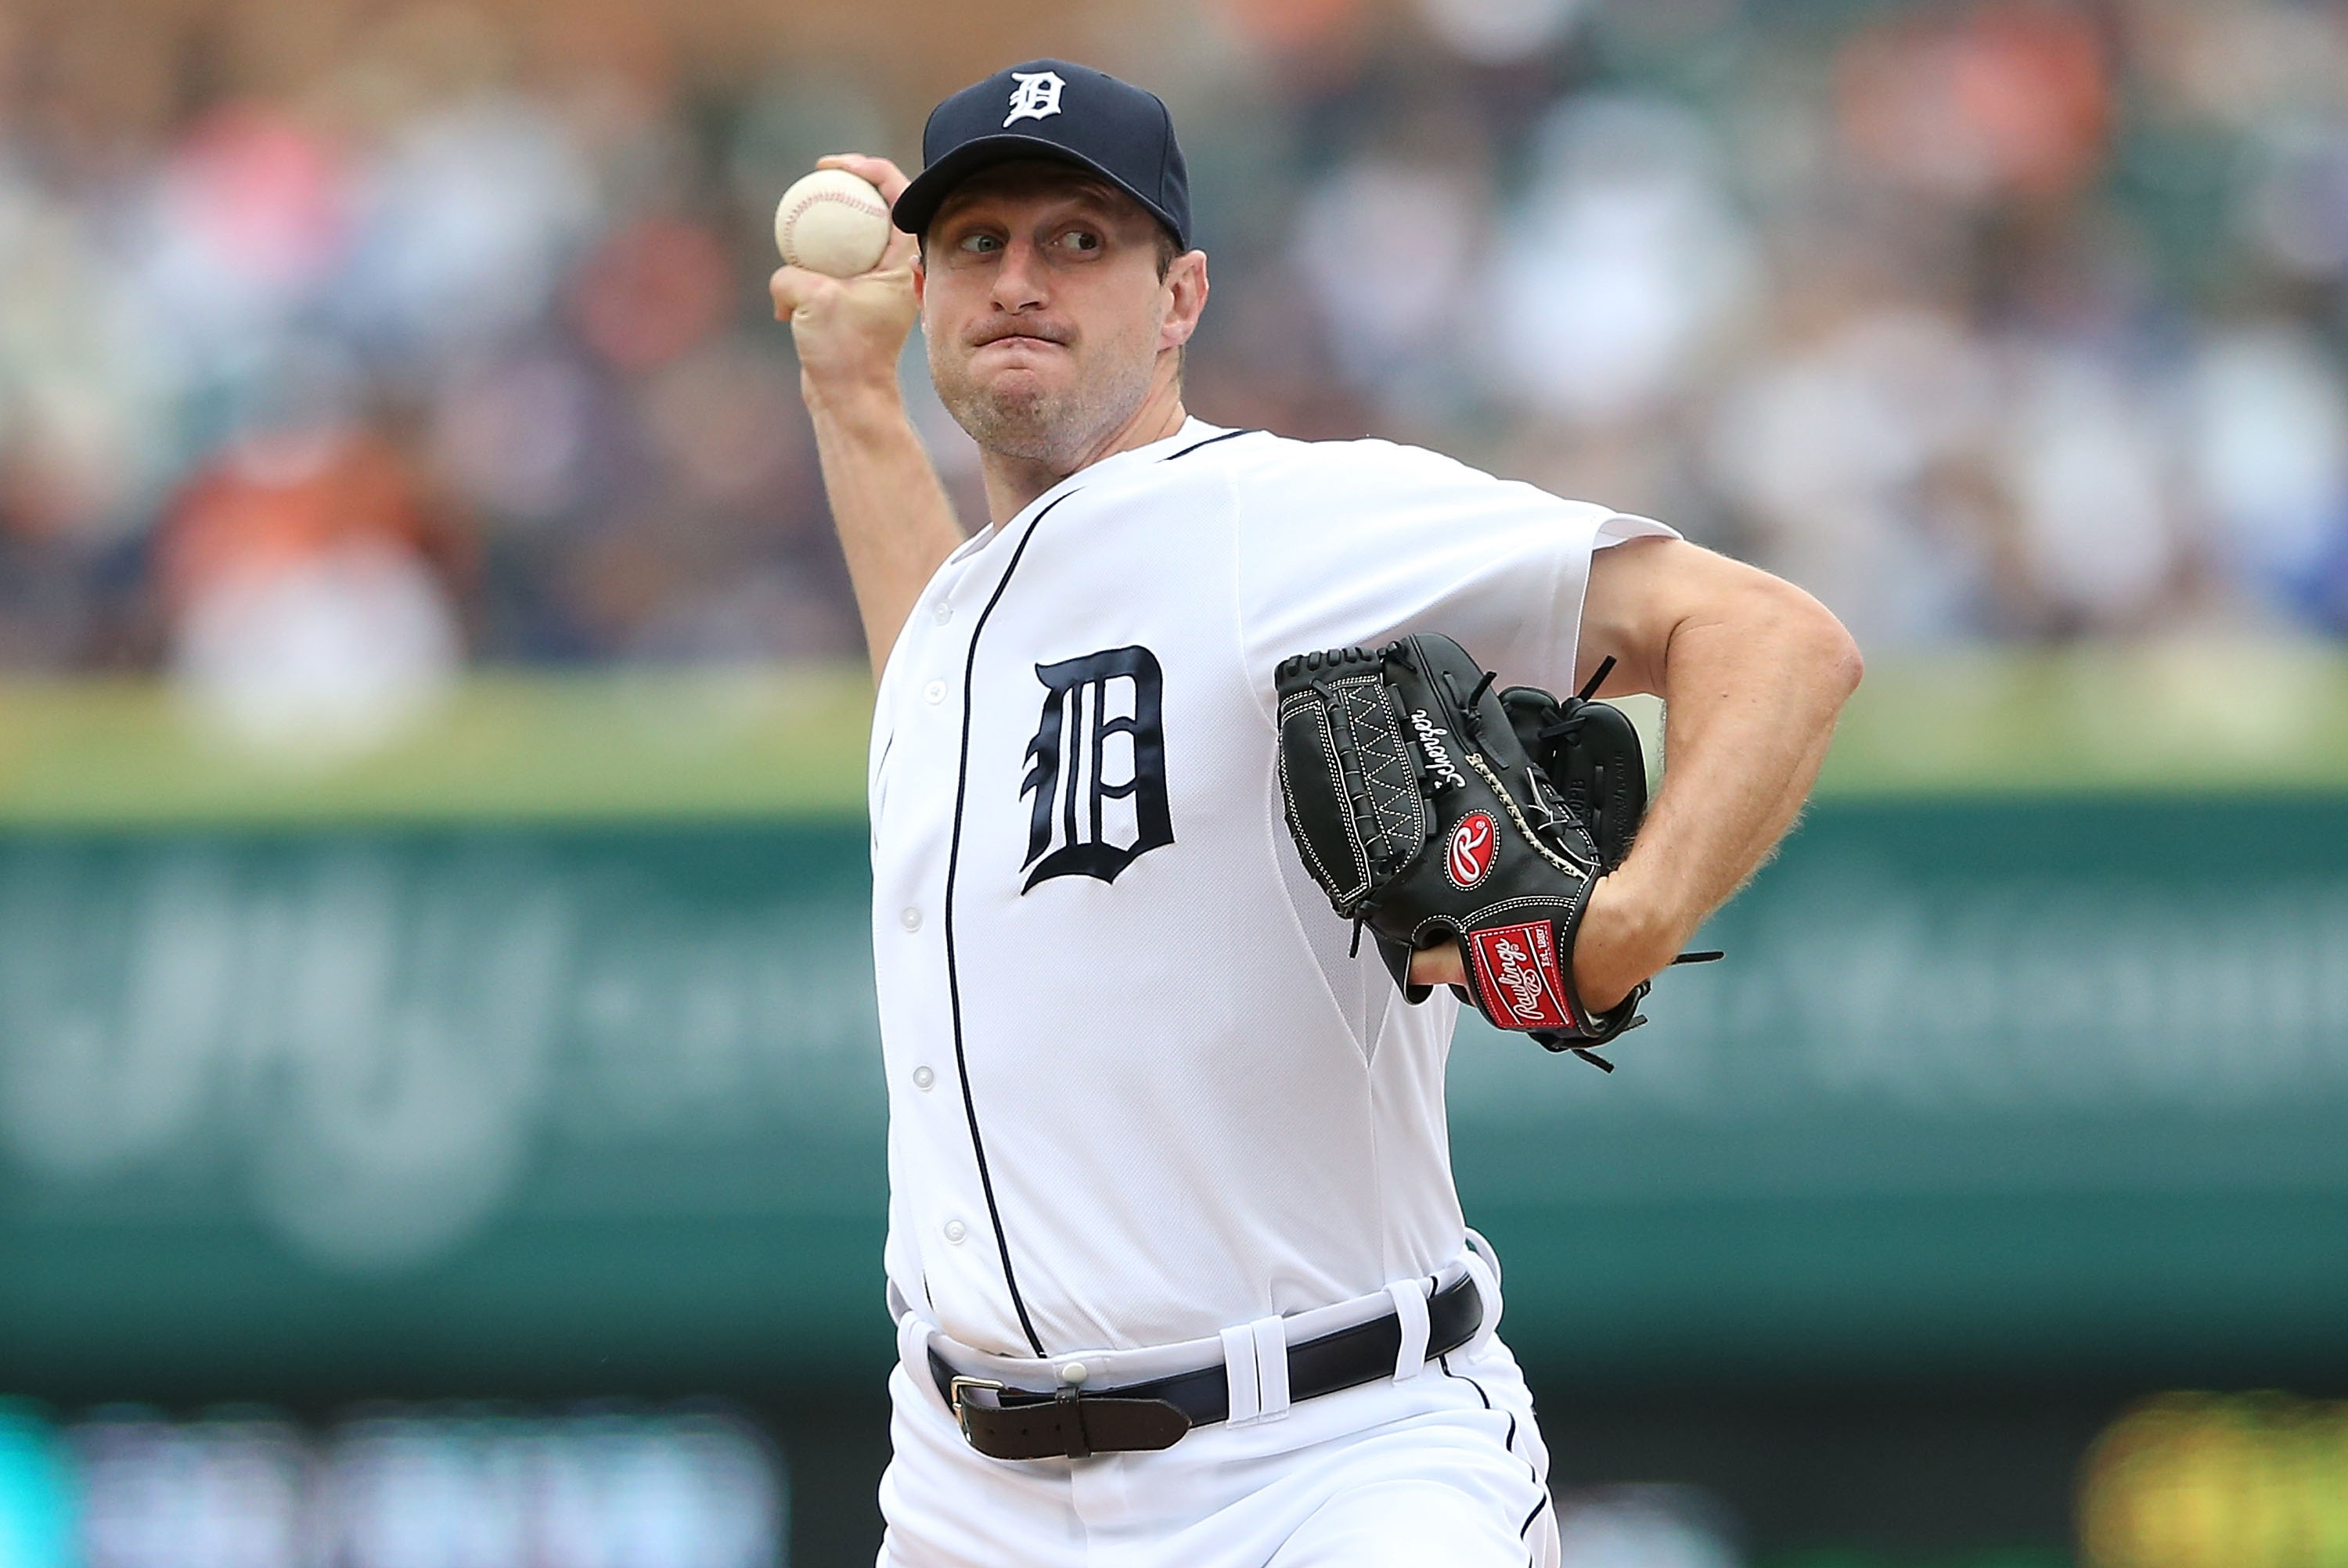 The story of Detroit Tiger Max Scherzer and the loss of his